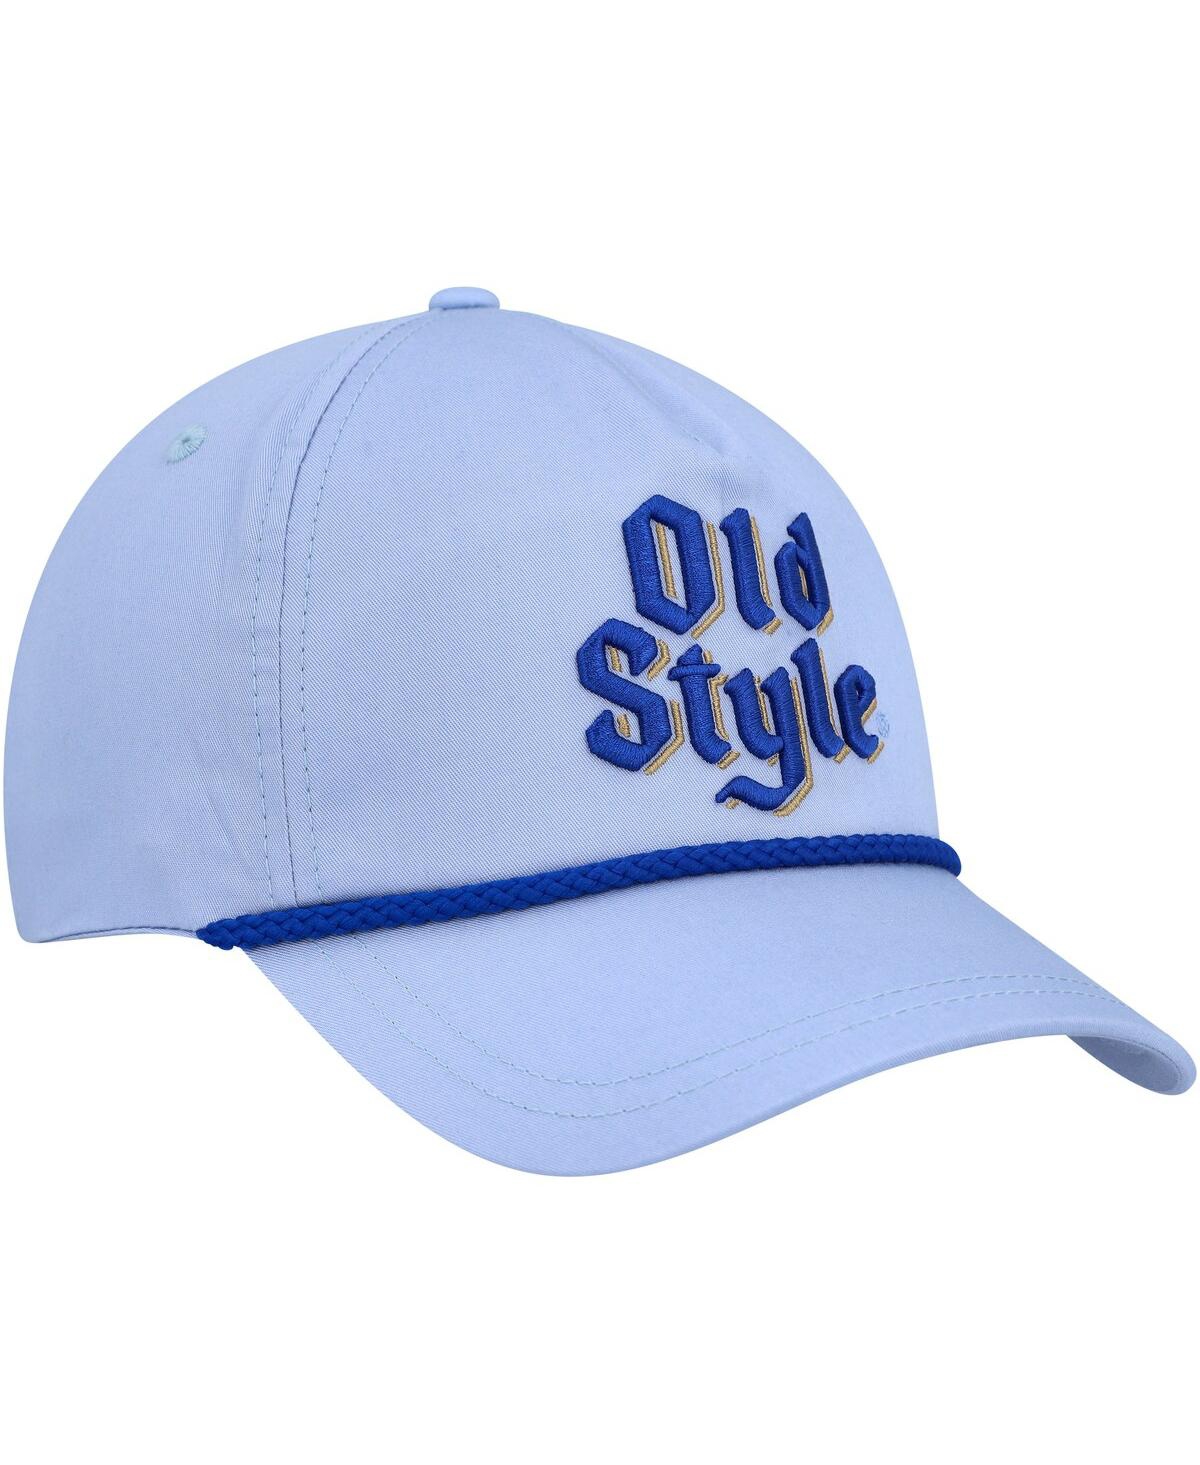 Shop American Needle Men's  Blue Old Style Rope Snapback Hat